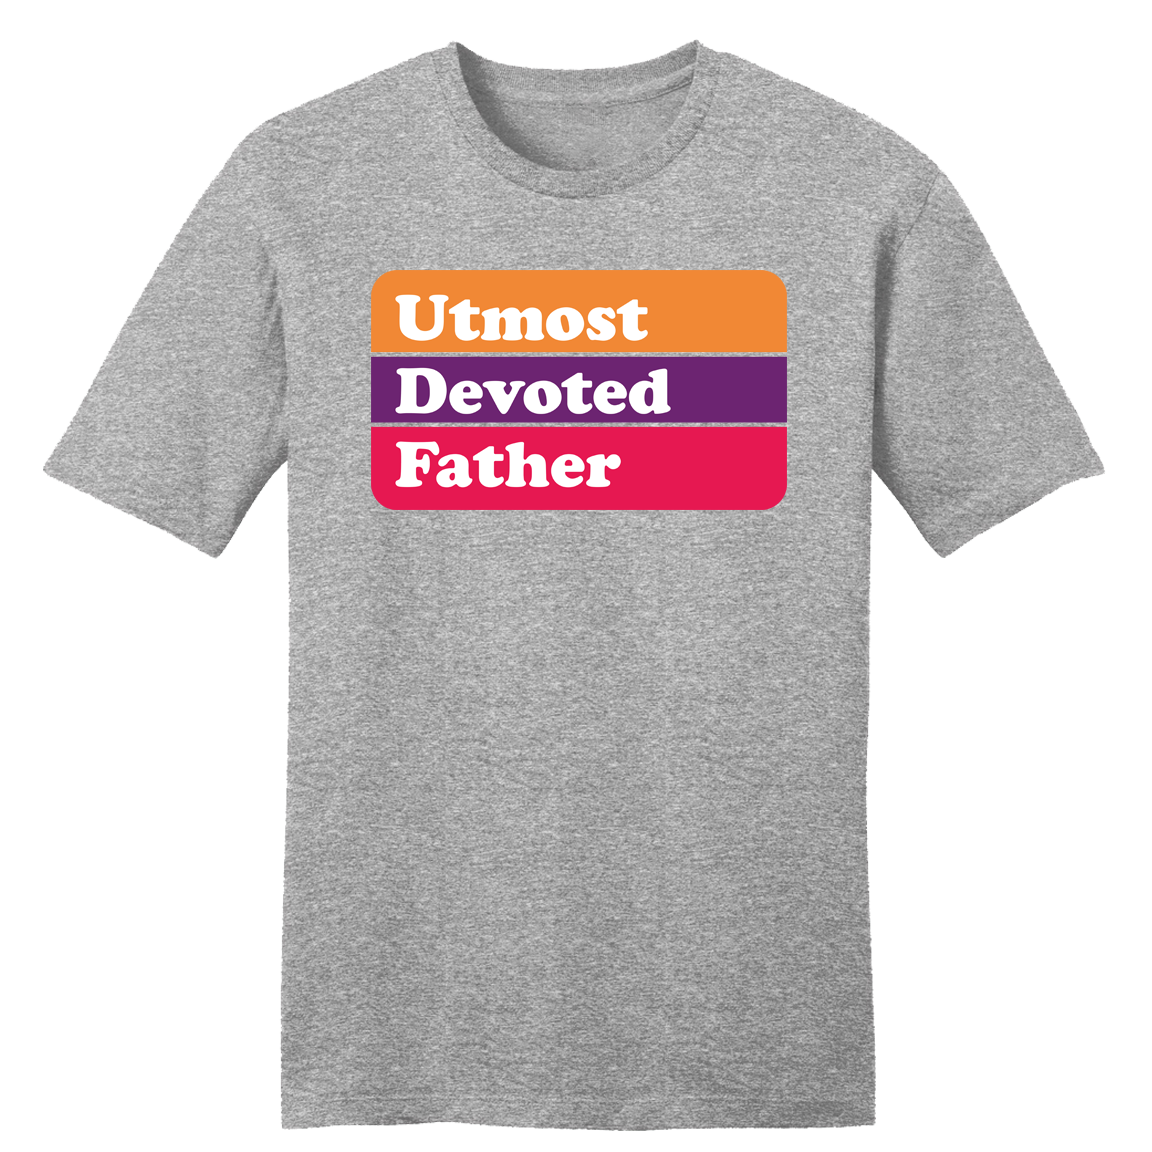 Utmost Devoted Father T-shirt